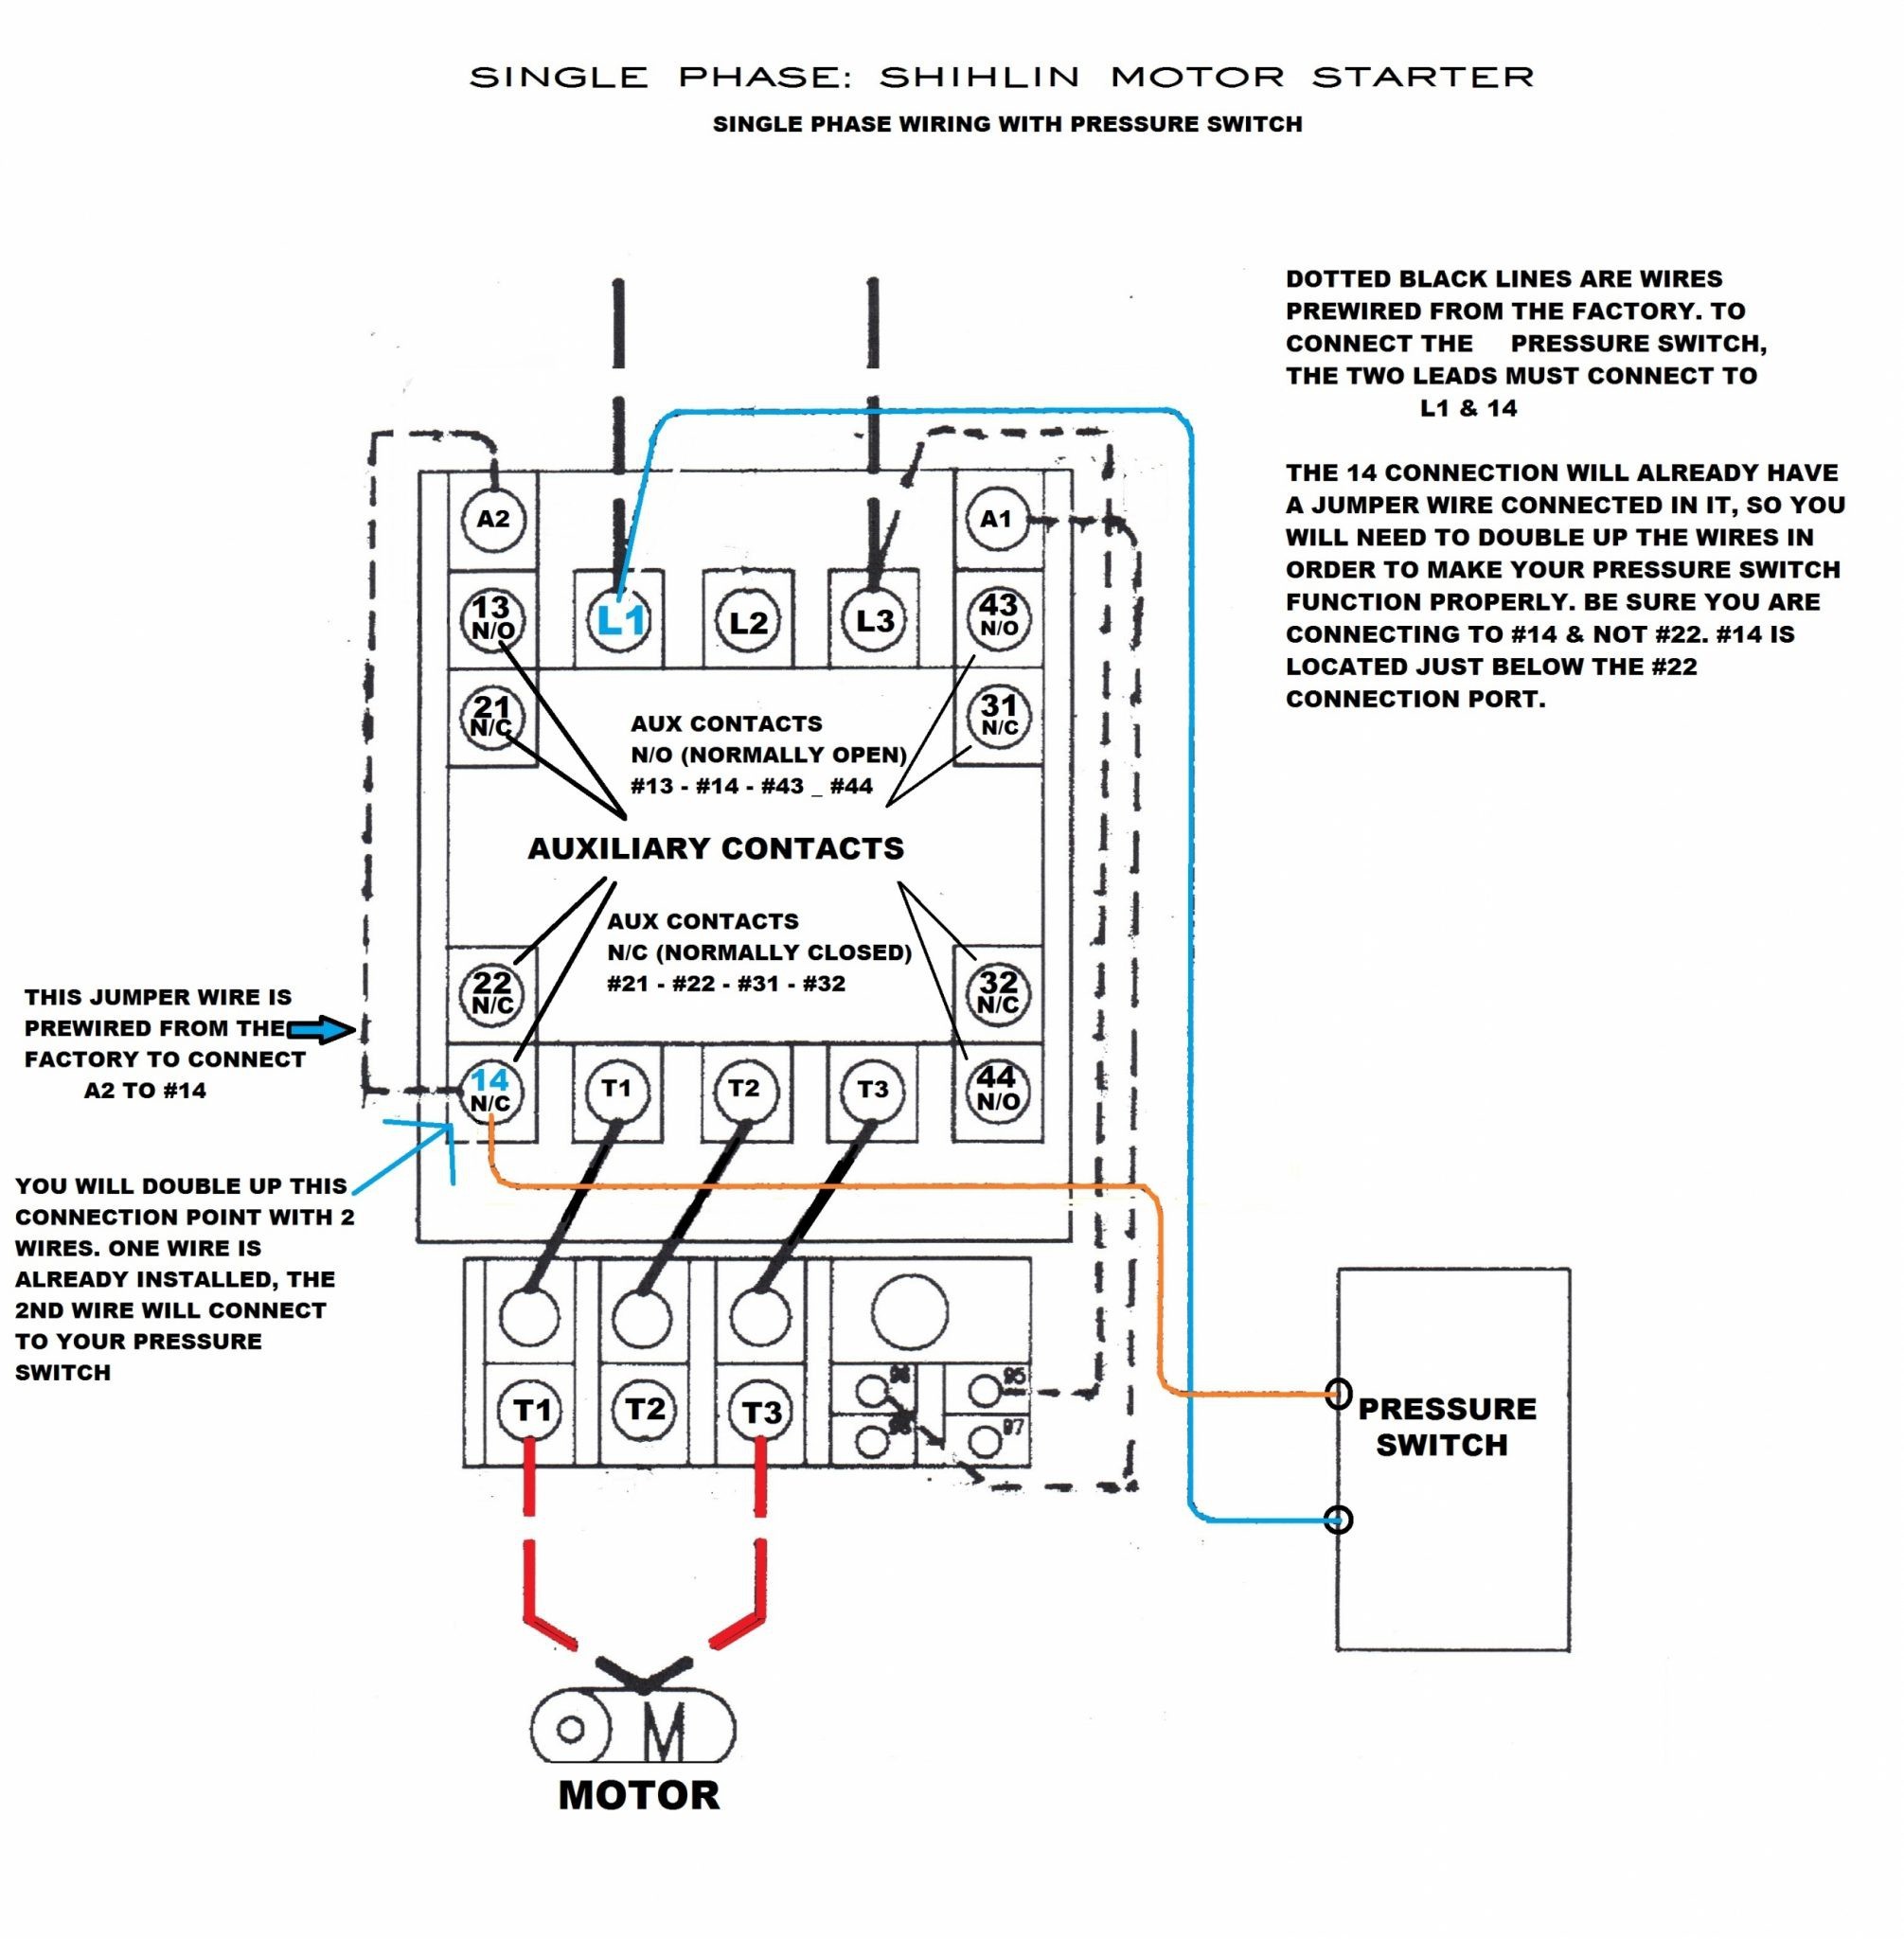 How to Wire A Garage Diagram Elegant How to Wire A Garage Diagram Diagram Of How to Wire A Garage Diagram